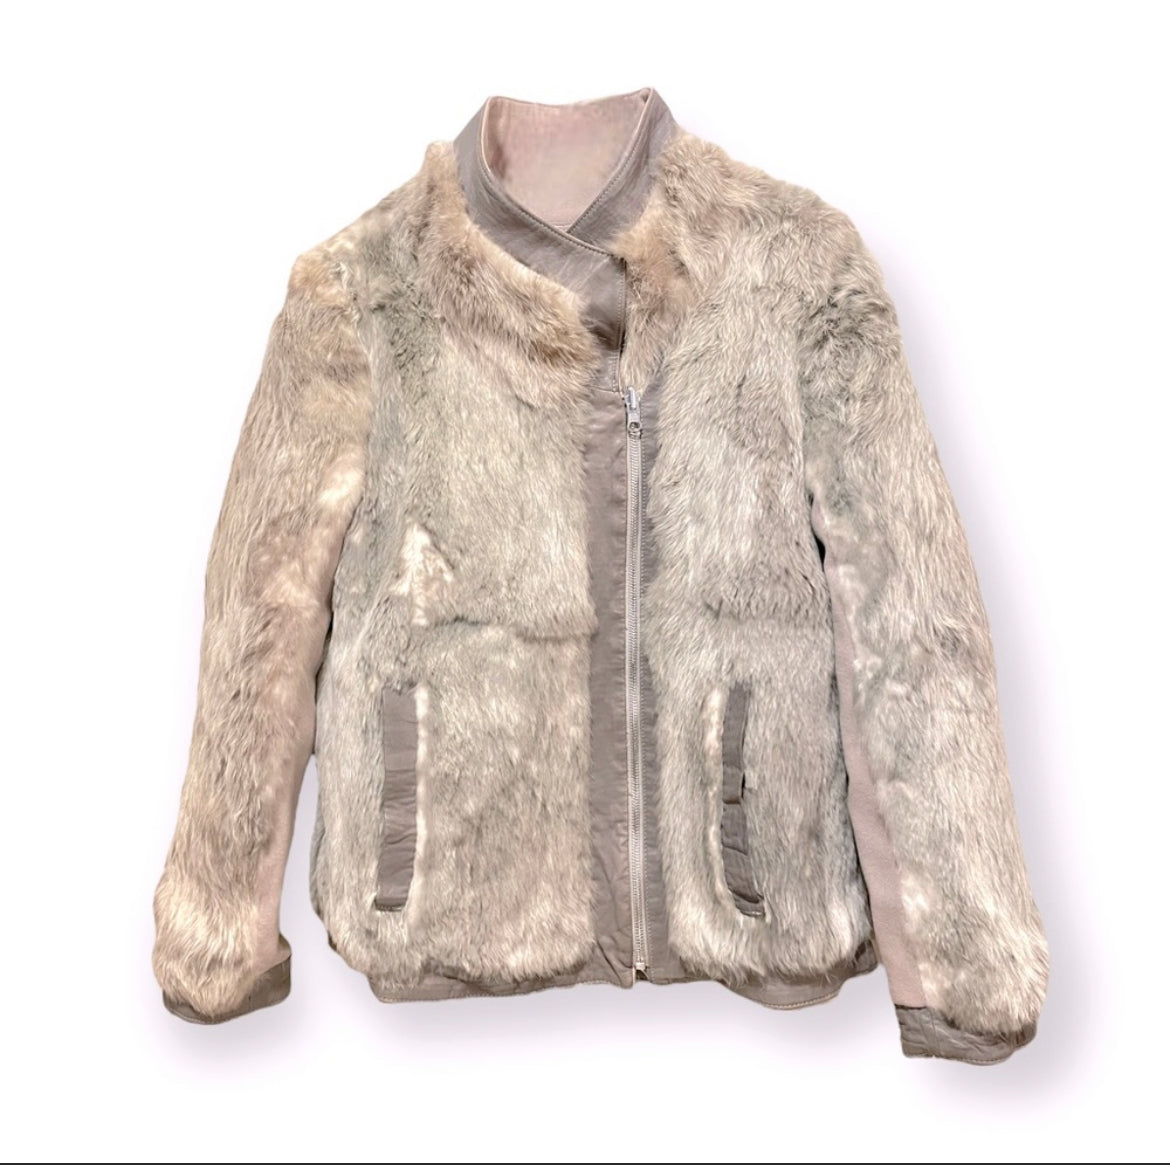 HELMUT LANG Reversible Wool & Fur Jacket with Lamb leather Accents |Size: Small|